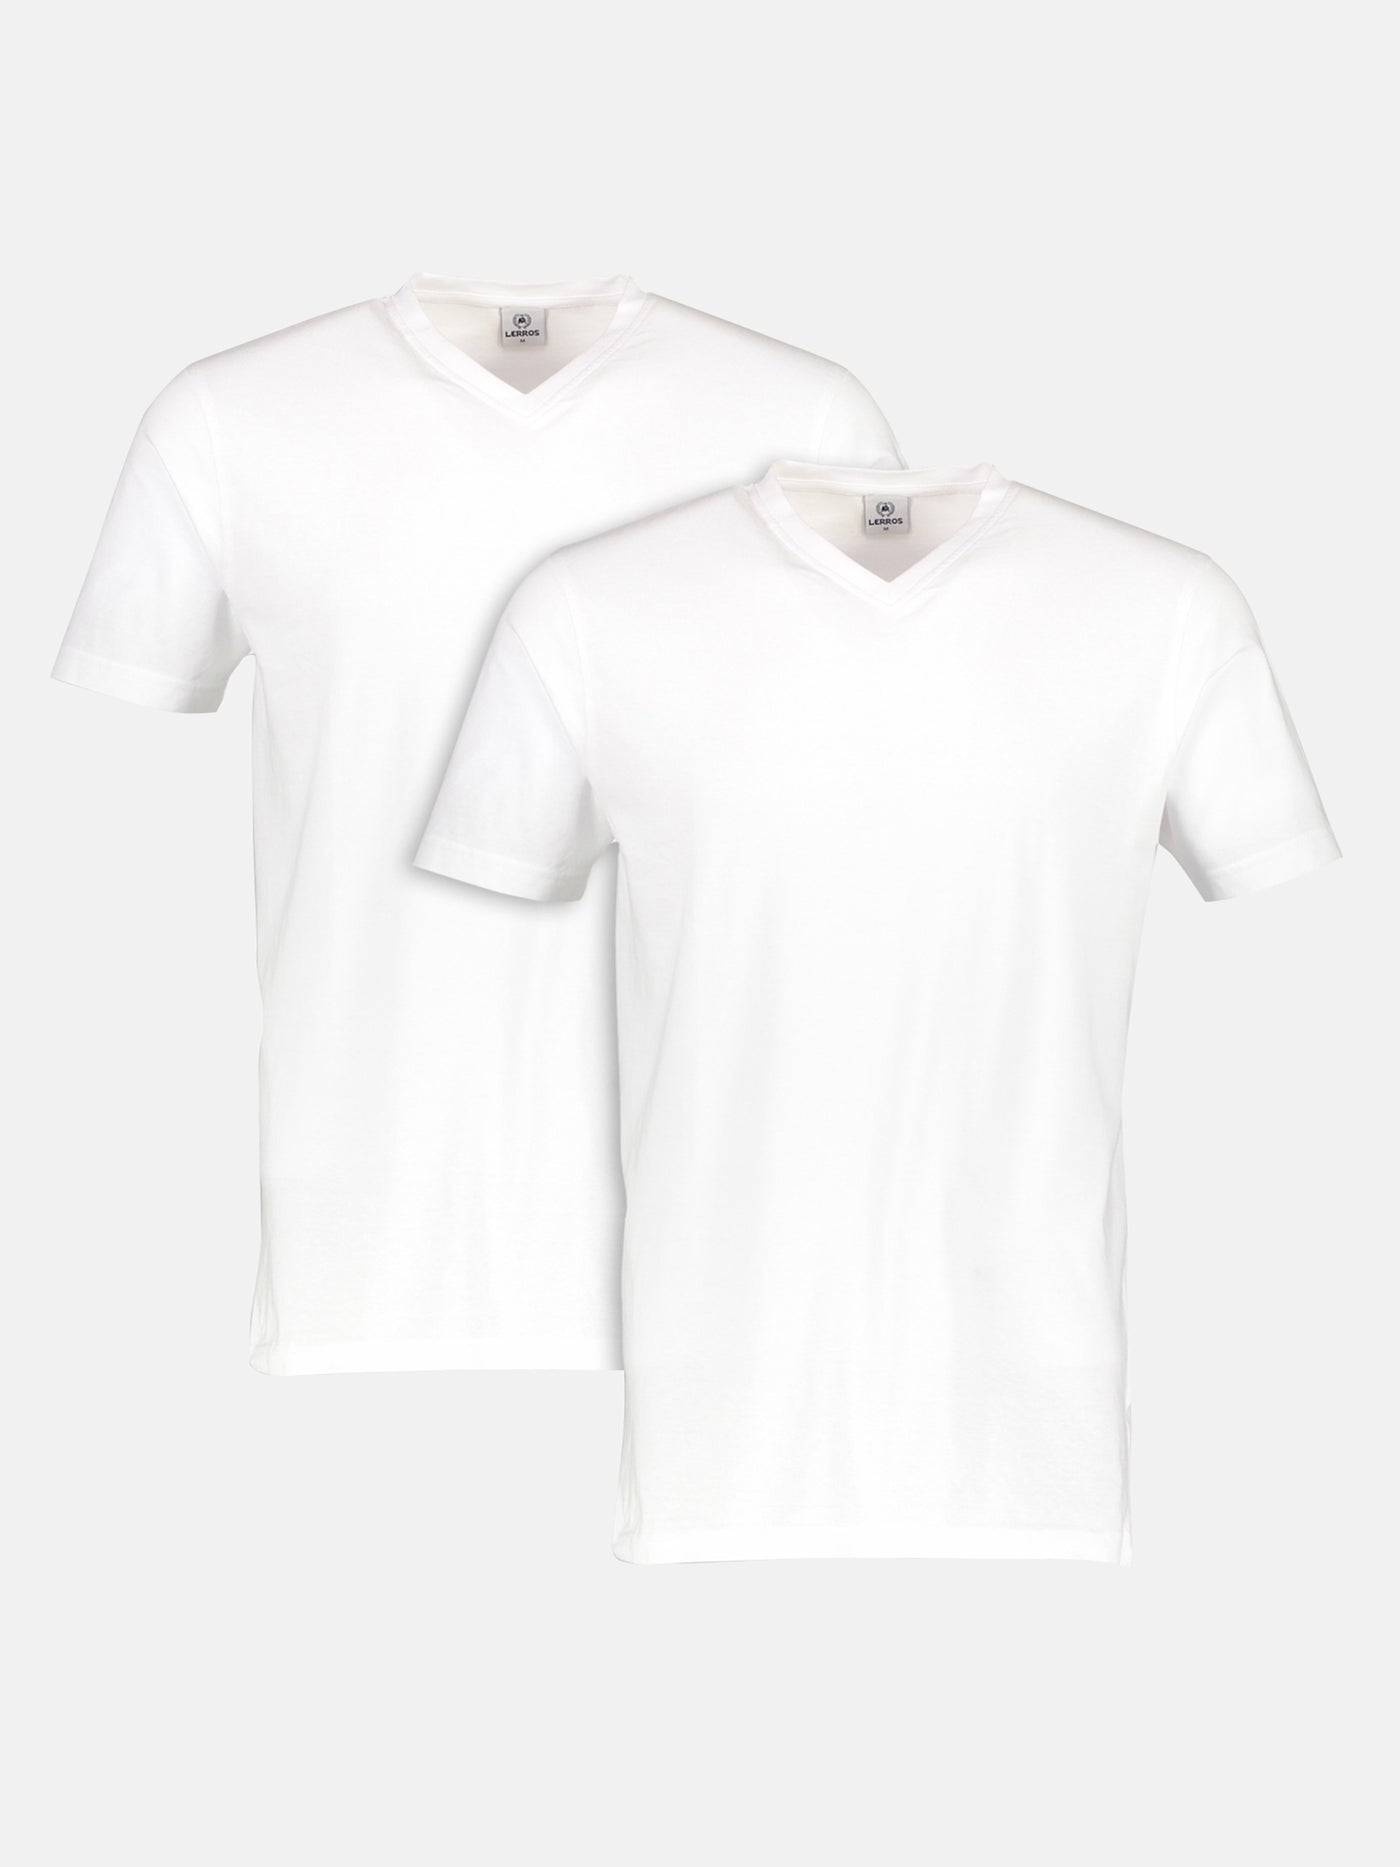 Double pack T-shirt, V-neck in premium cotton quality